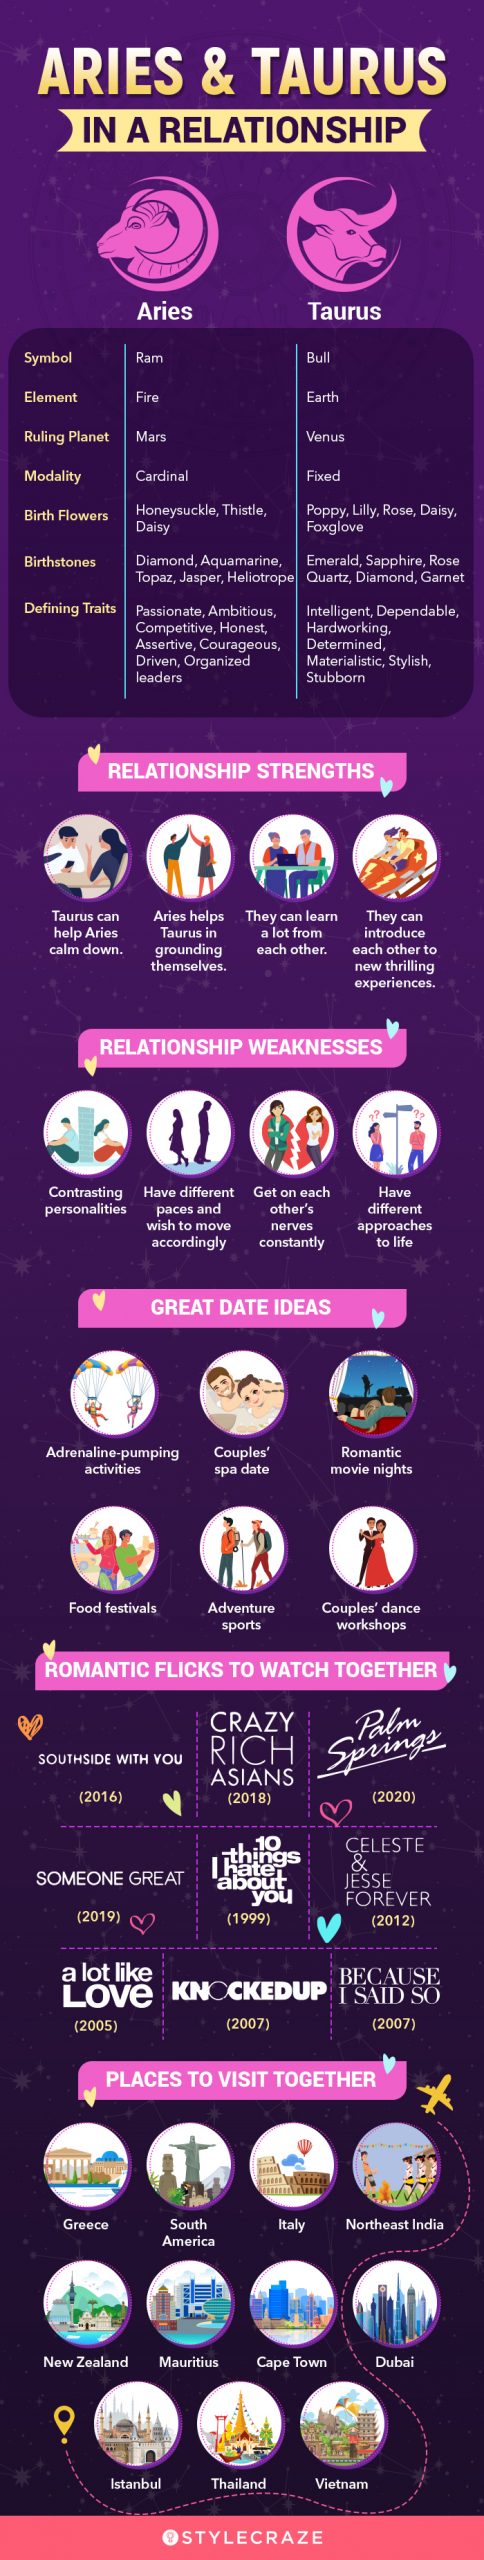 aries and taurus in a relationship (infographic)